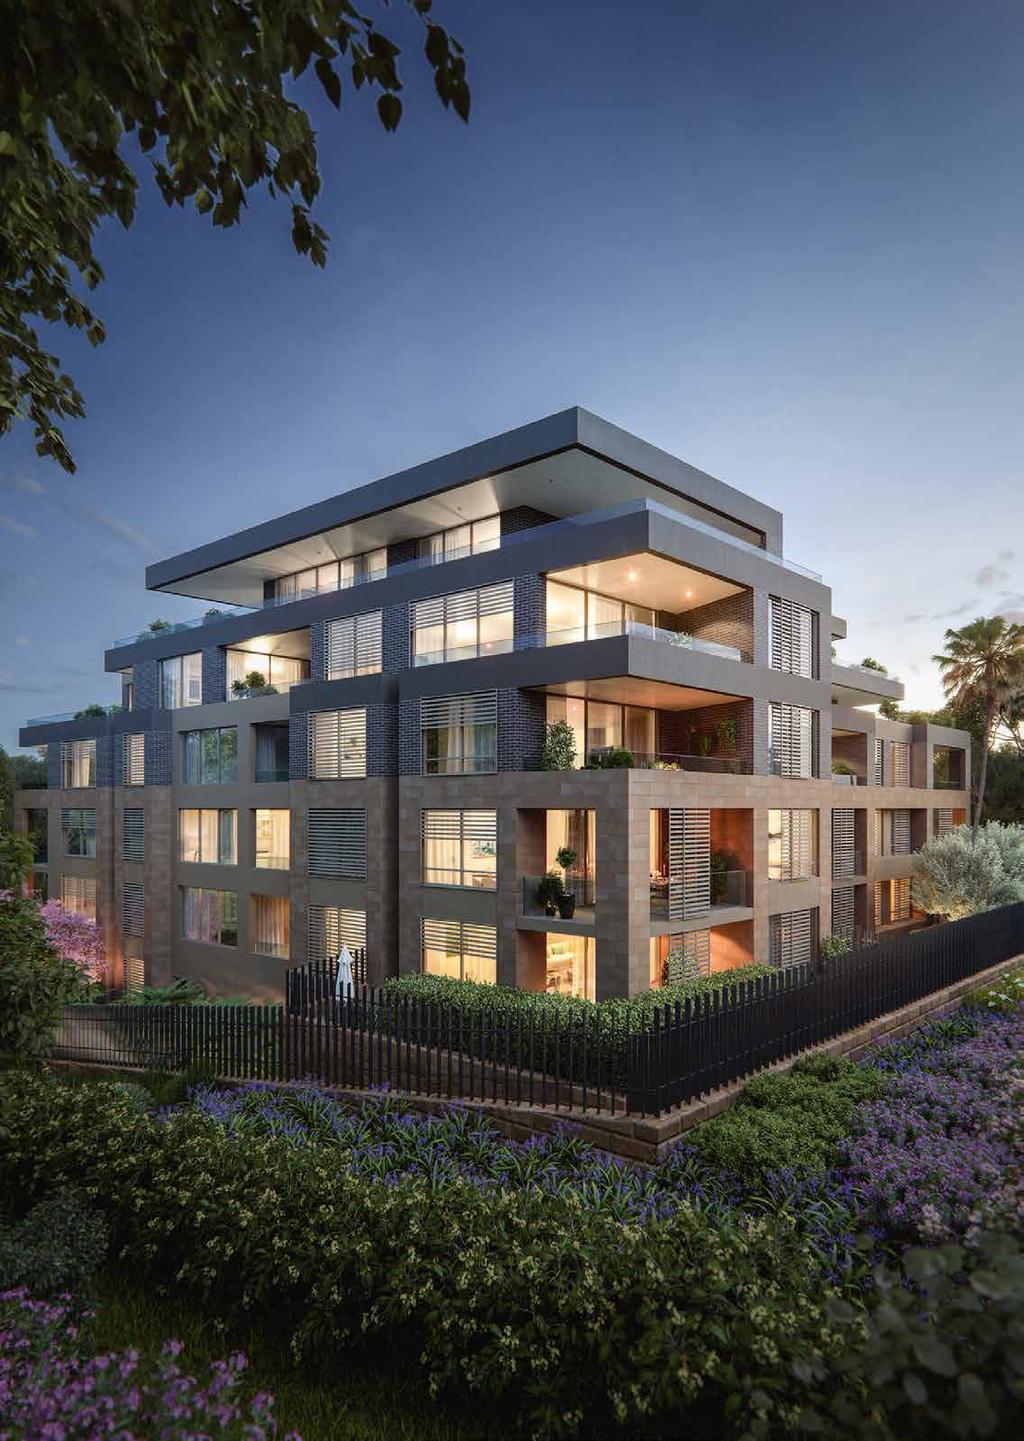 EXTERIOR - BUILDING A ARCHITECTURAL STYLE AND SOPHISTICATION Octavia delivers the finest architecture and interior design to the peaceful heart of leafy Killara.